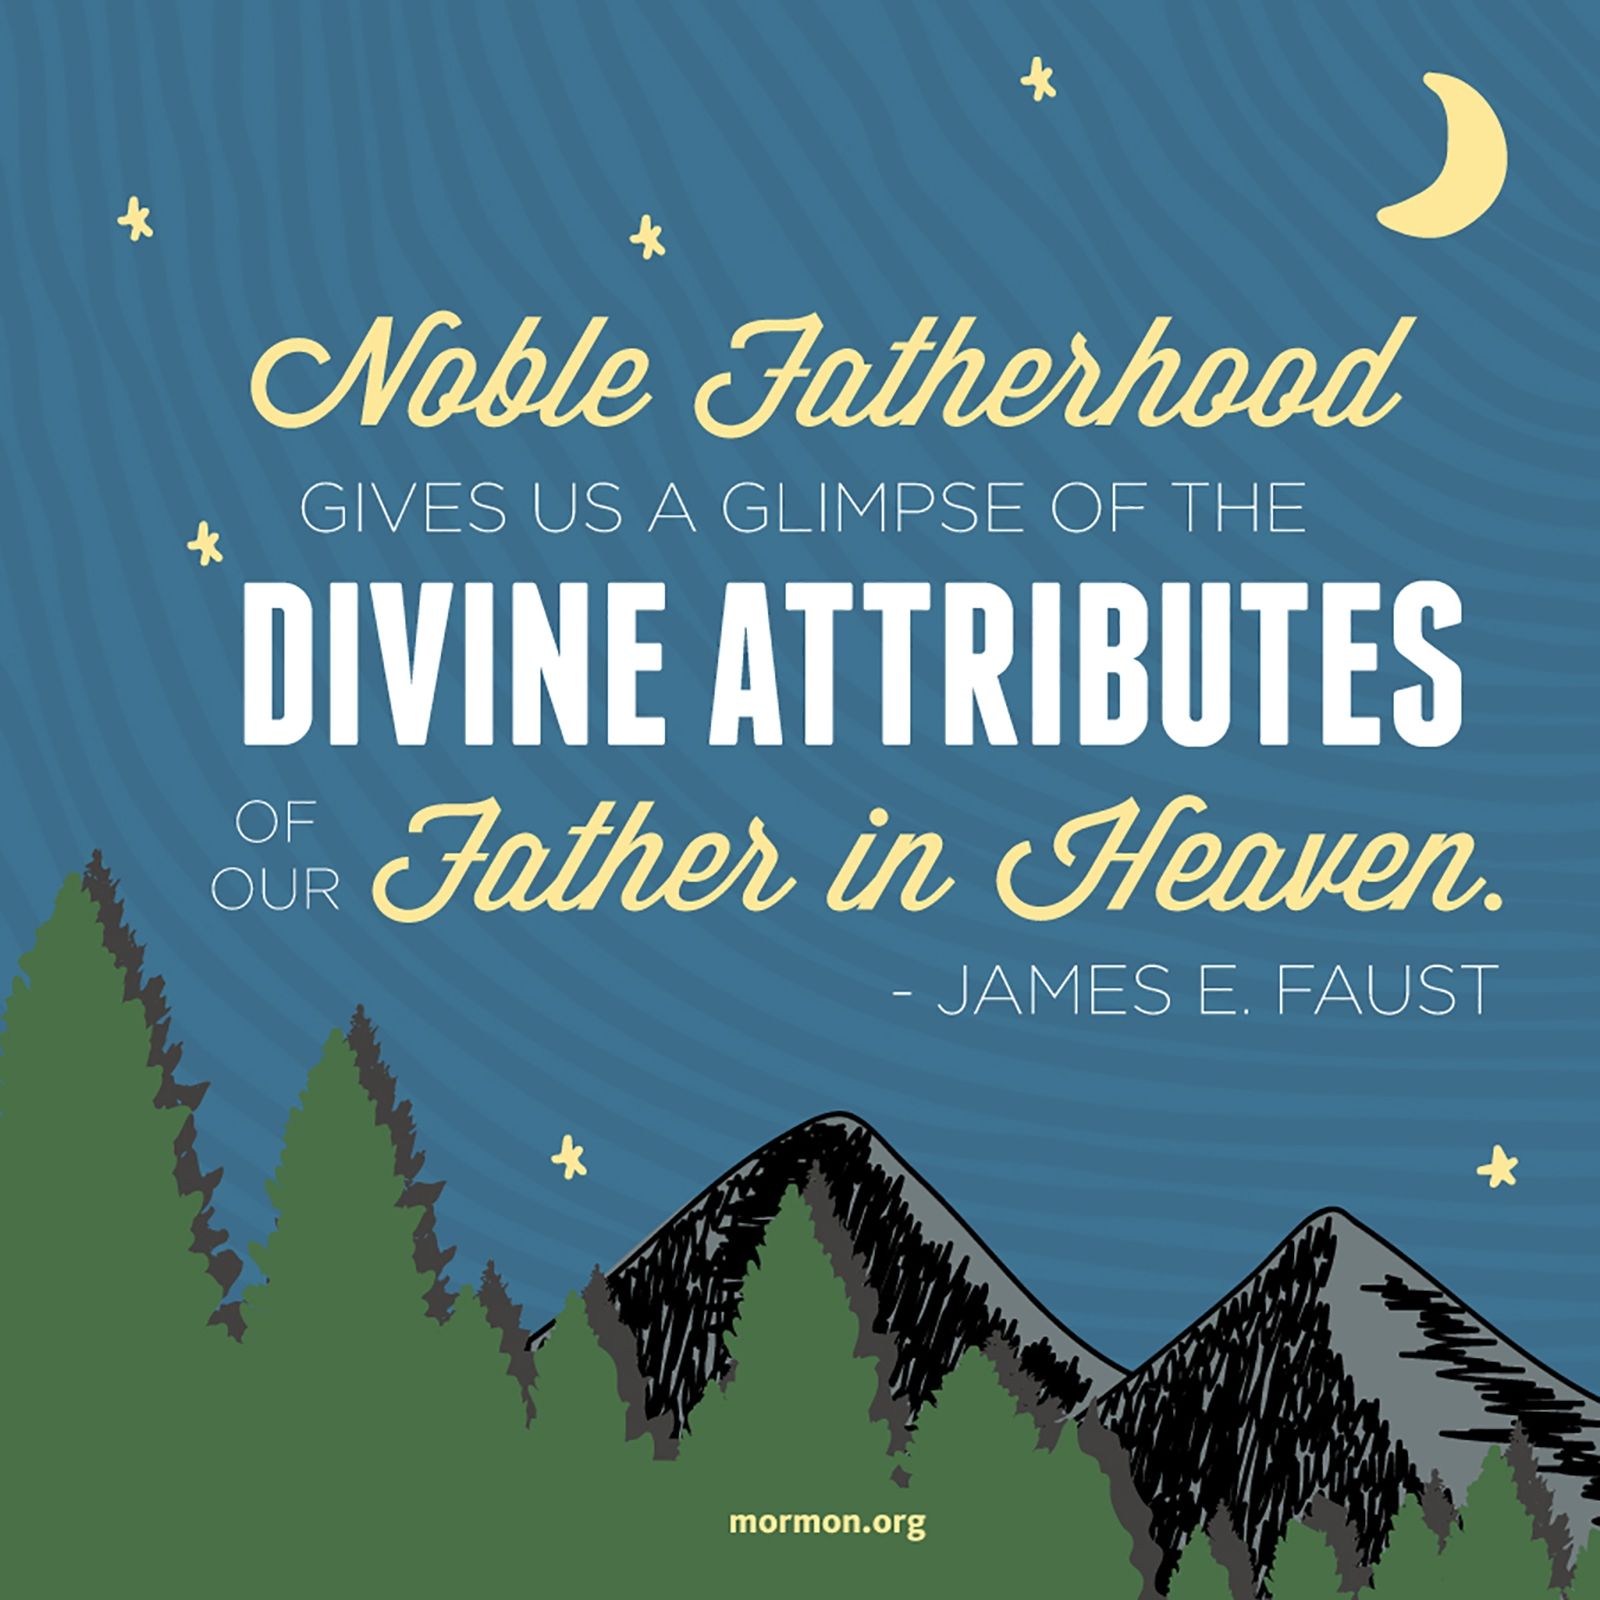 “Noble fatherhood gives us a glimpse of the divine attributes of our Father in Heaven.”—President James E. Faust, “Them That Honour Me I Will Honour”